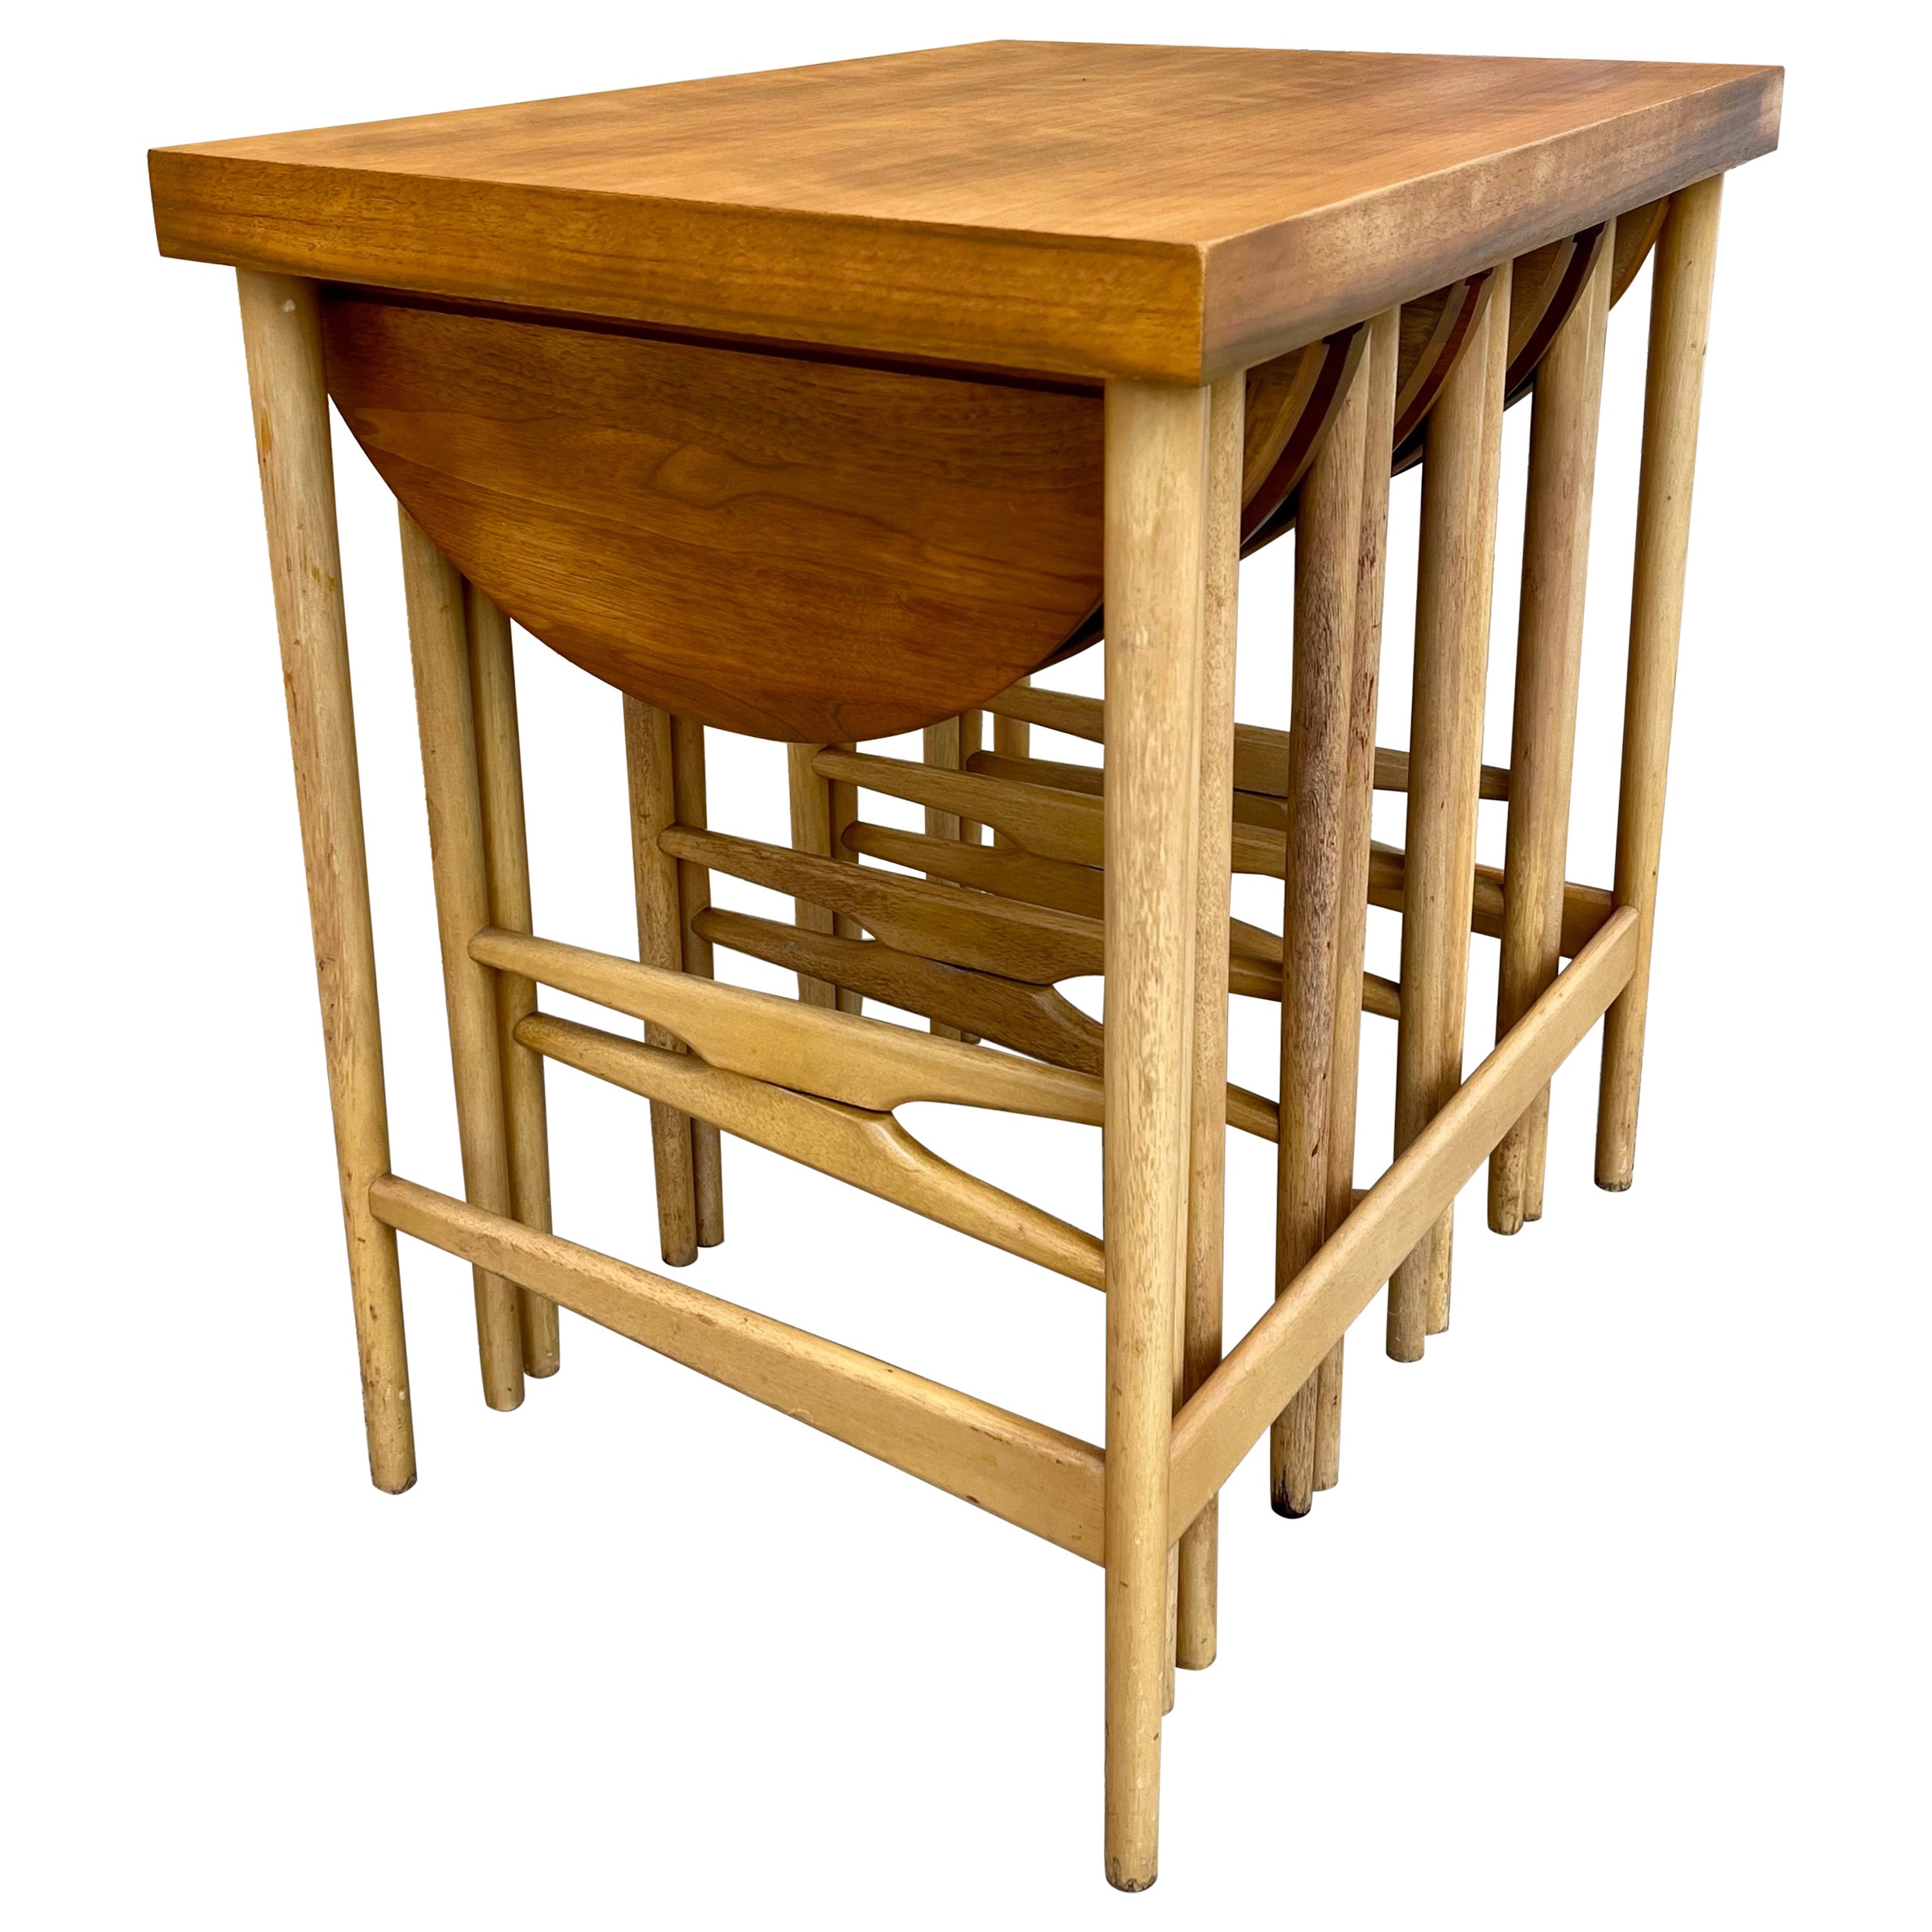 Bertha Schaefer Nesting Tables and Stacking Tables